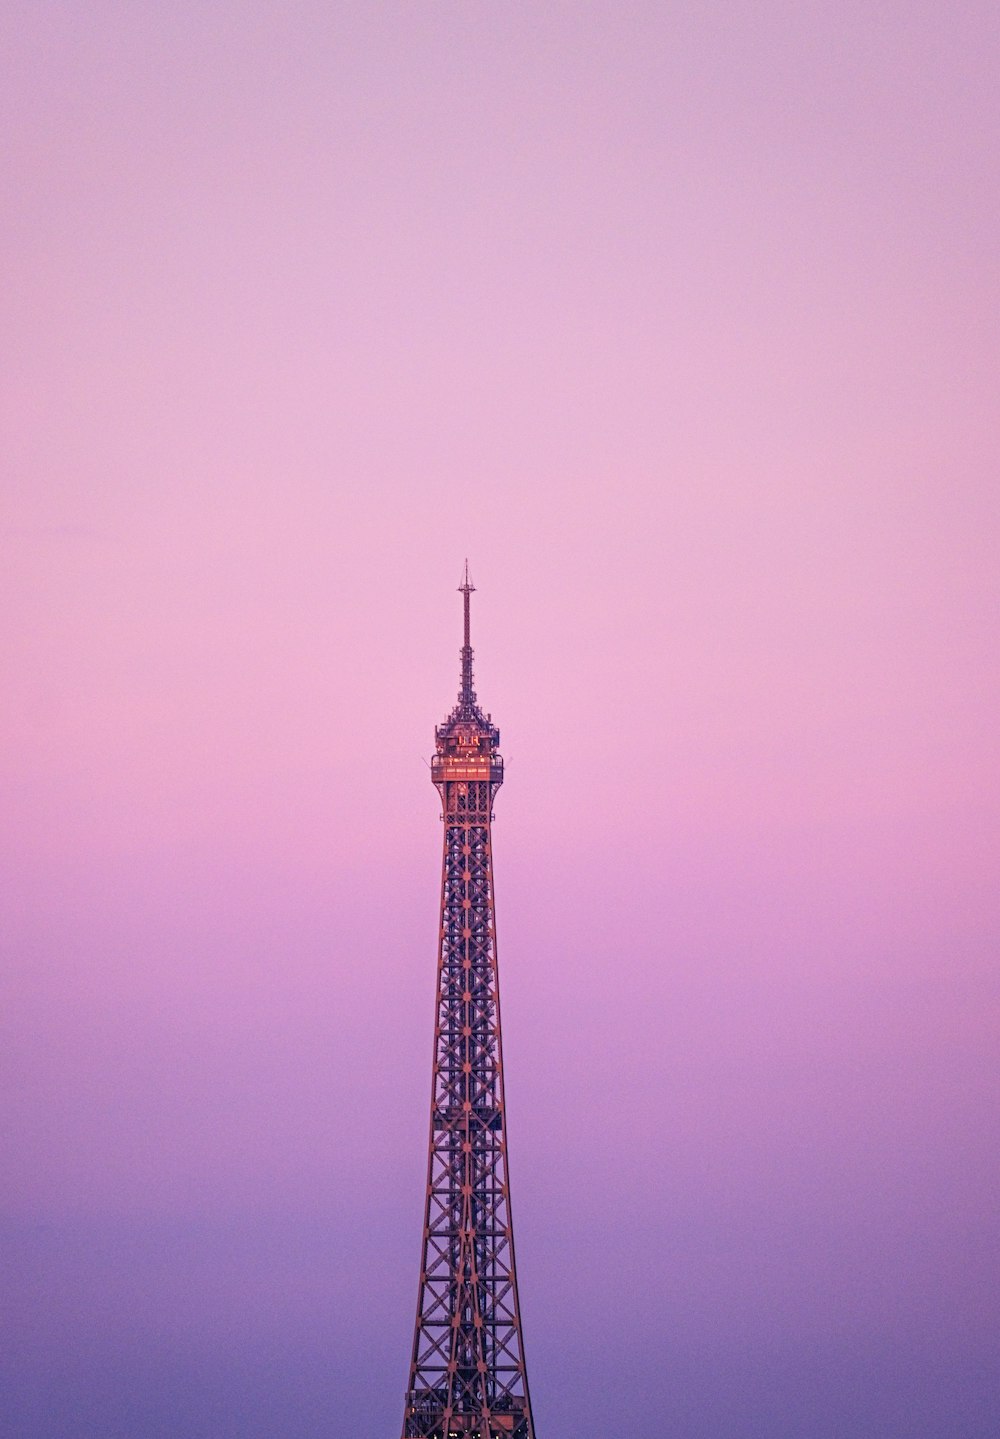 the eiffel tower is lit up at dusk